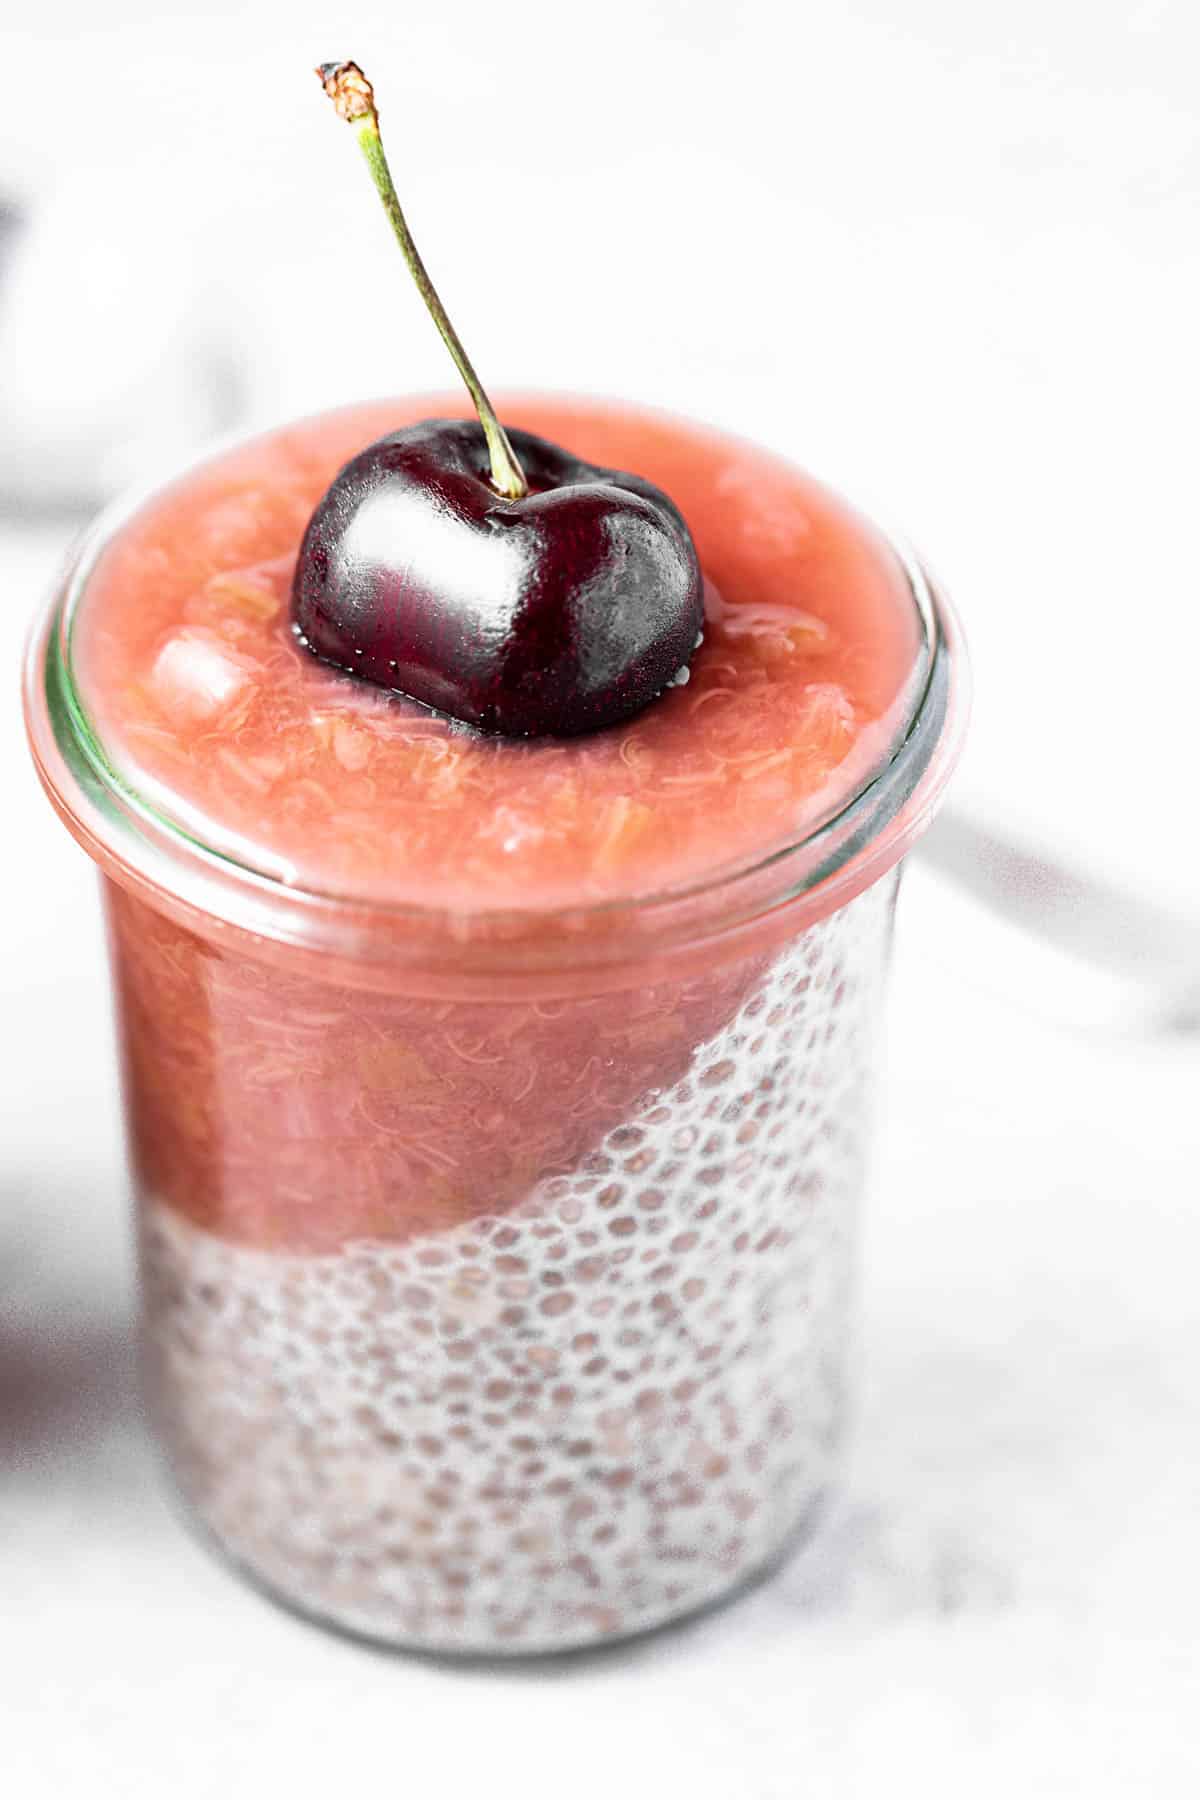 A closeup view of a chia pudding parfait topped with rhubarb ginger compote and a cherry.